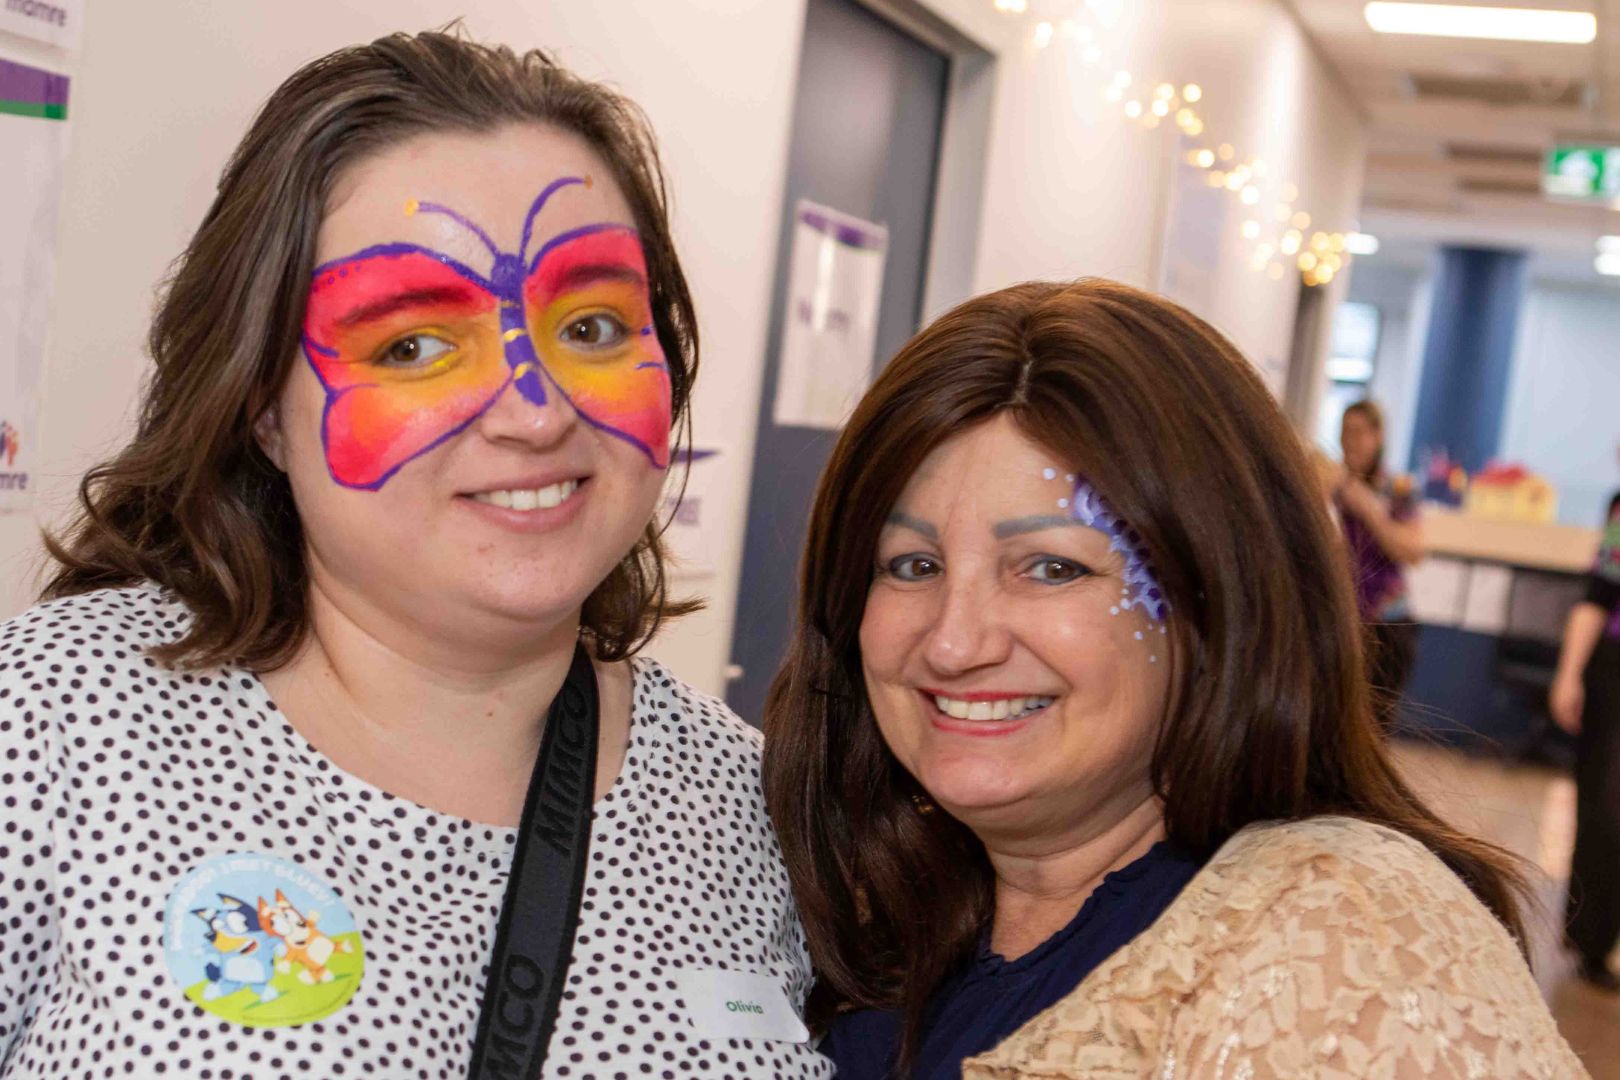 Two women with painted faces smile at the camera.